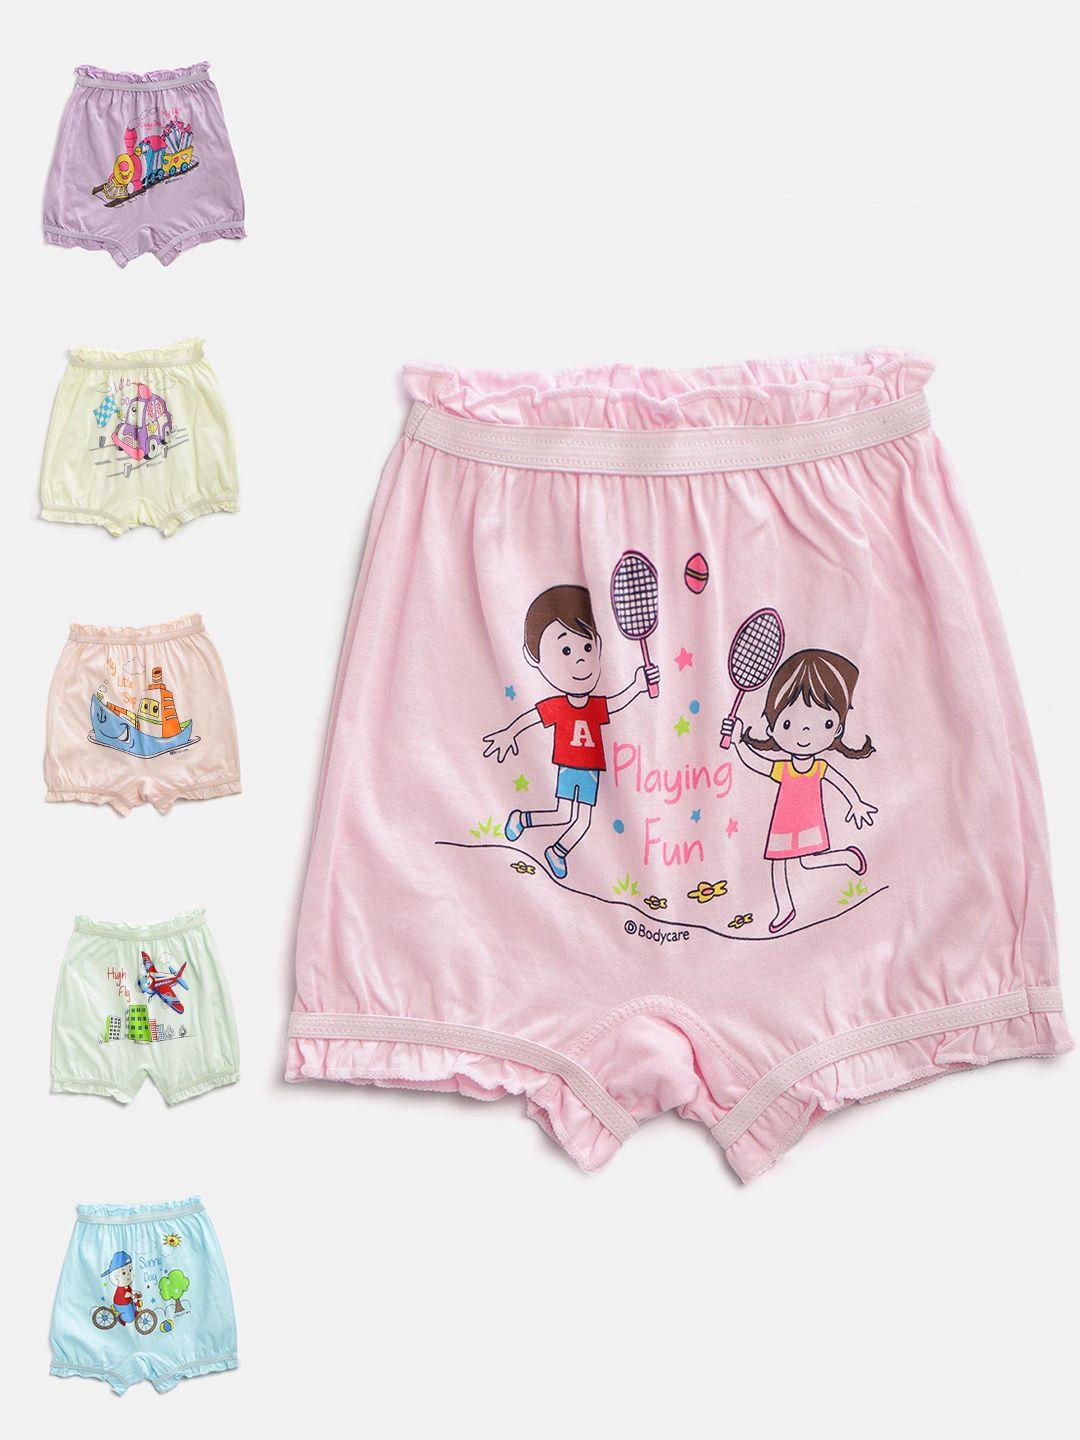 bodycare kids pack of 6 printed bloomer briefs 2200abcdab-75